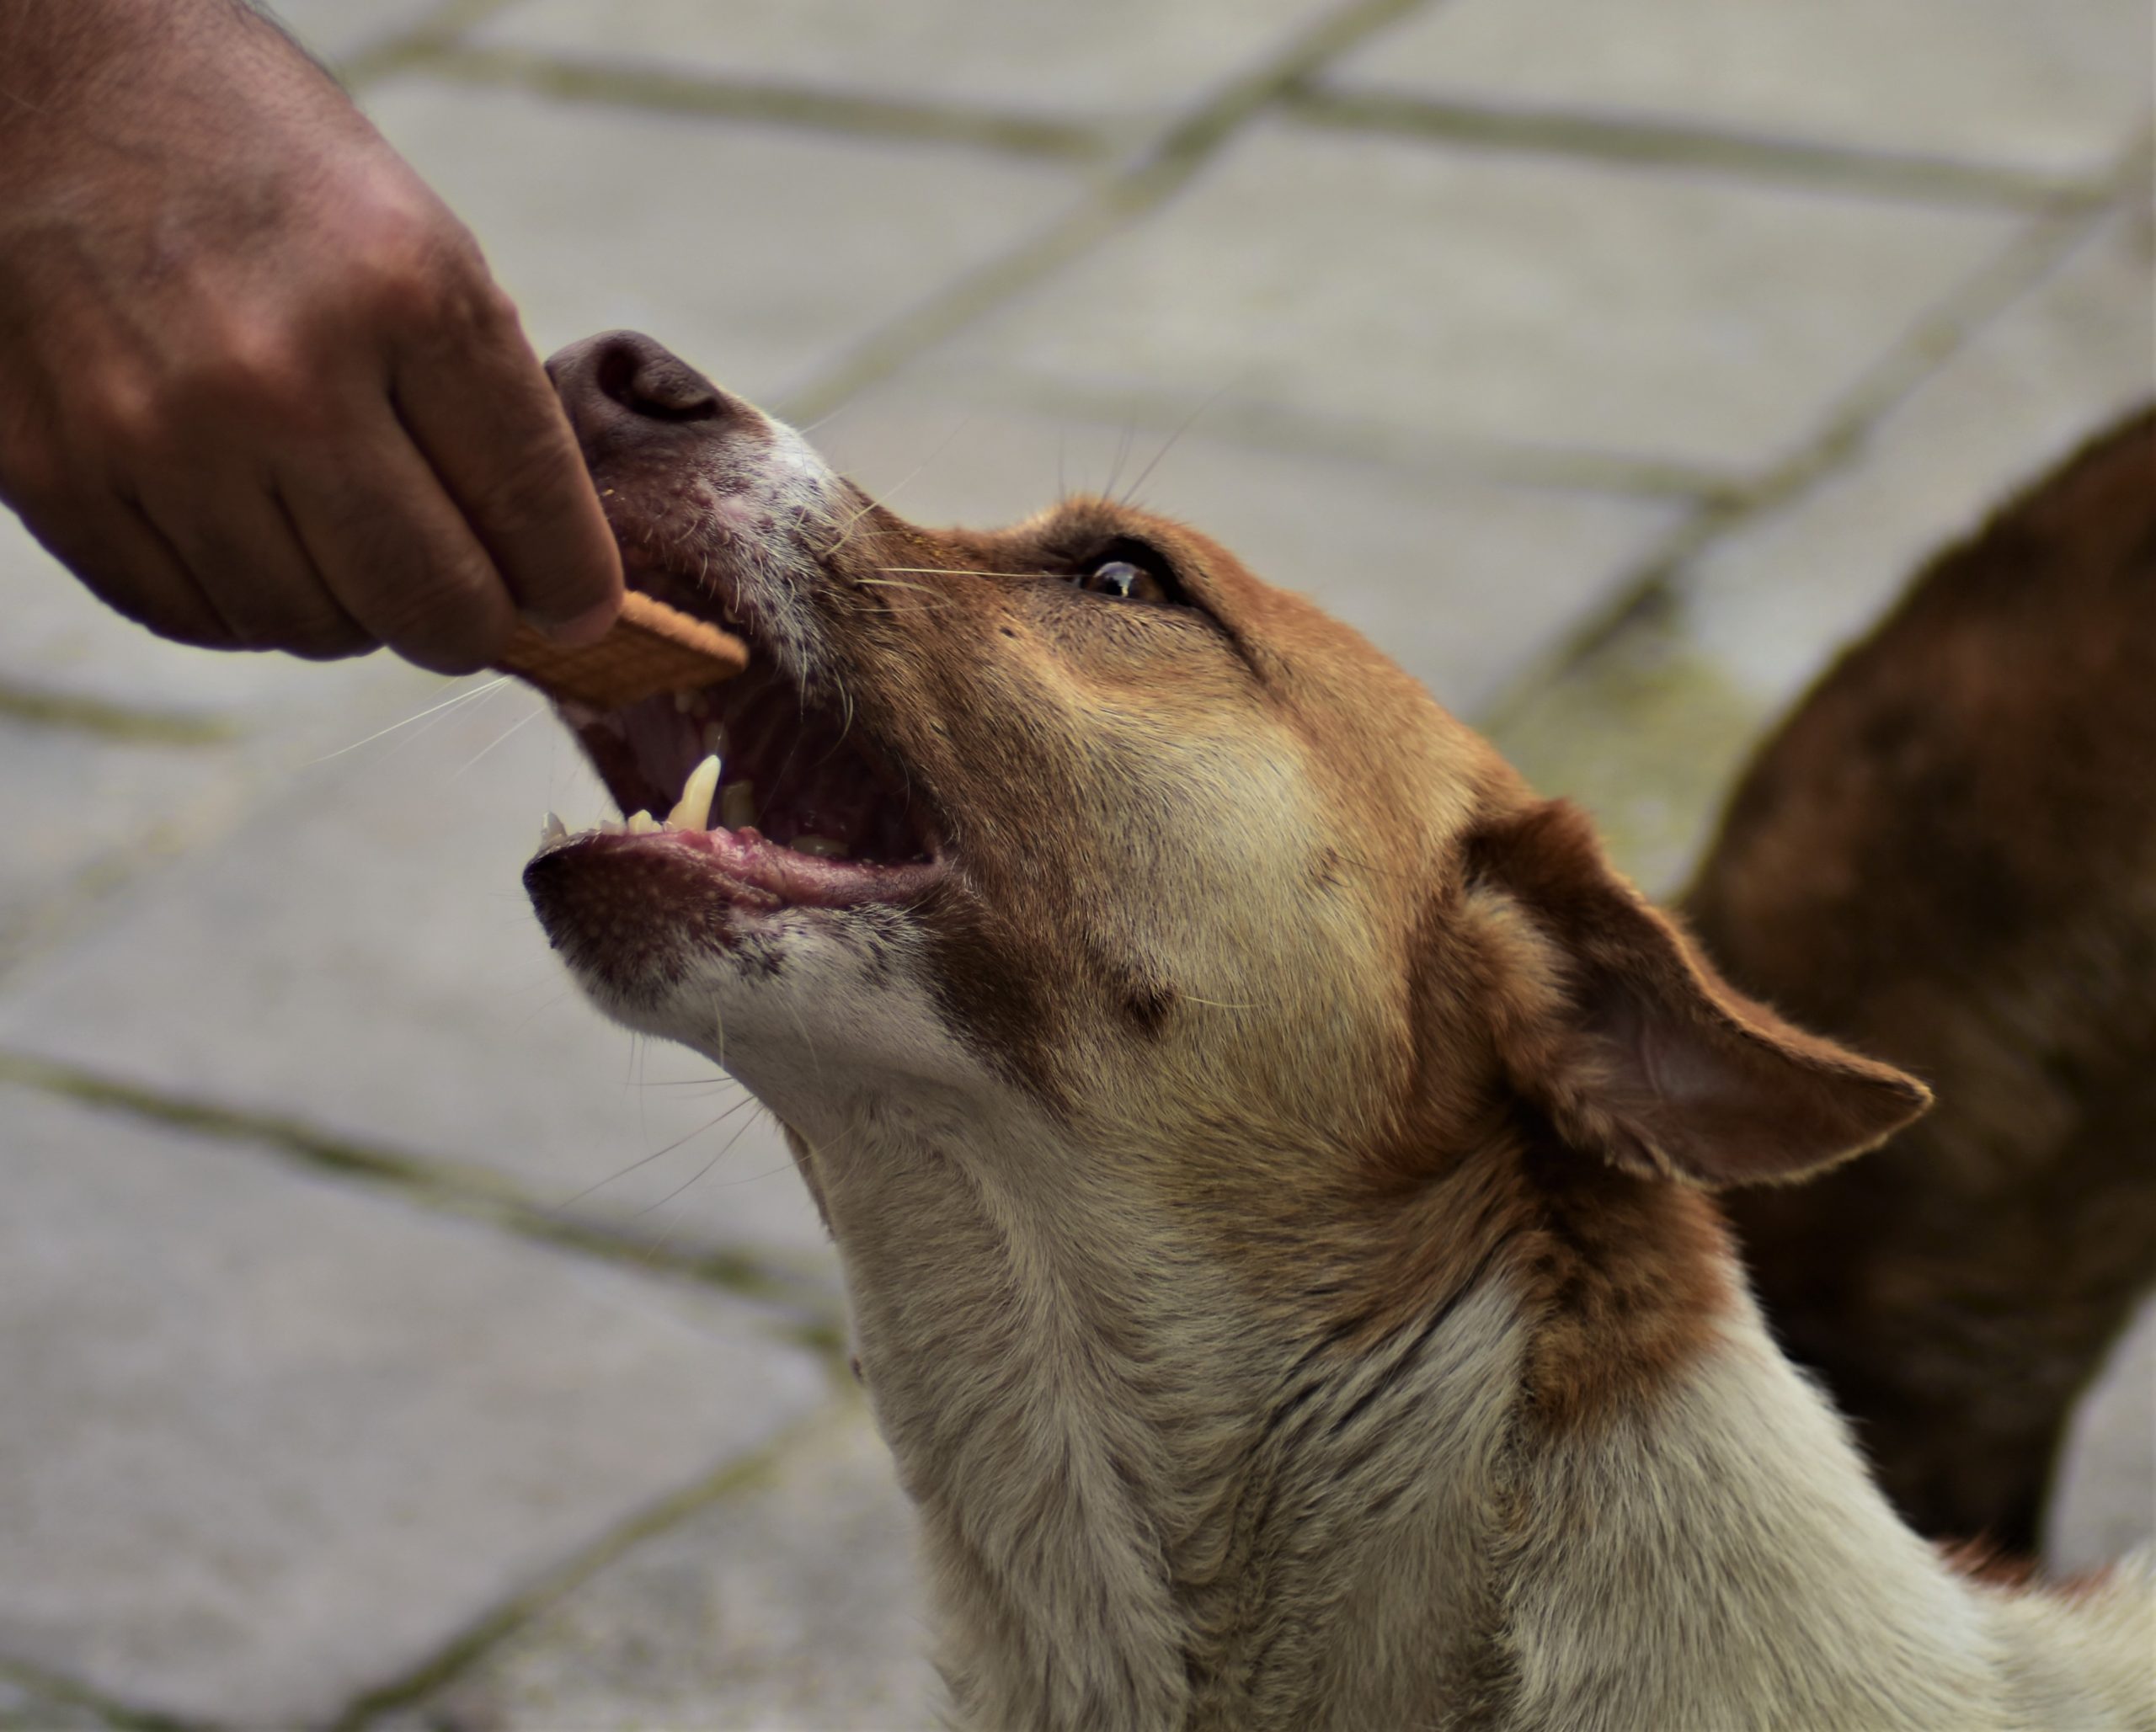 Stray dog eating a biscuit